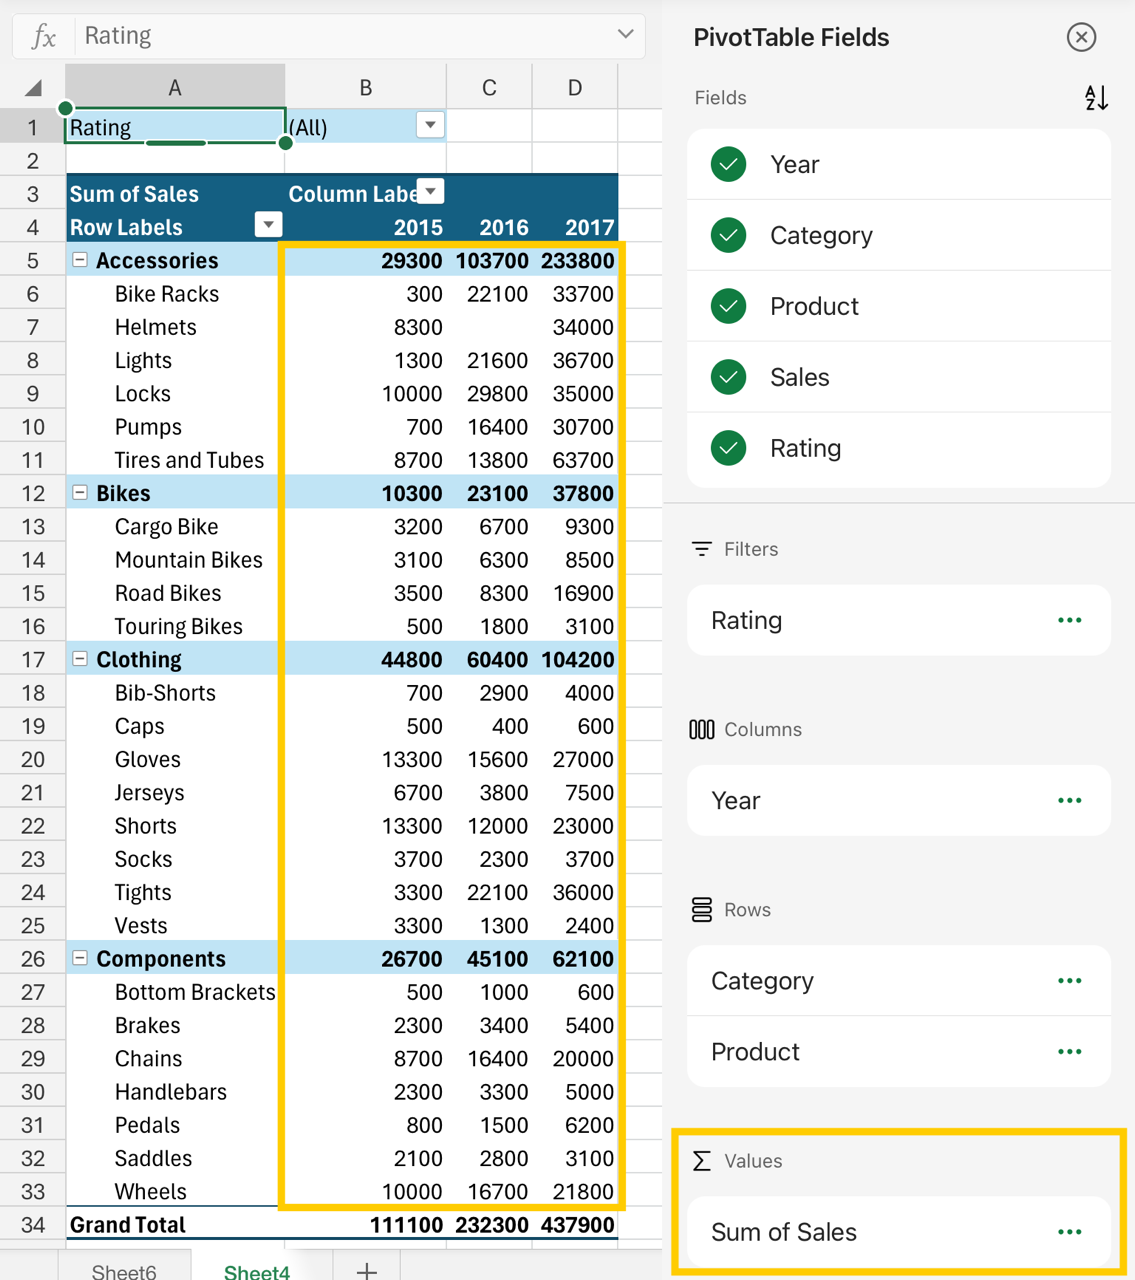 Image of the values area in the field list and the numeric values in the pivotTable.